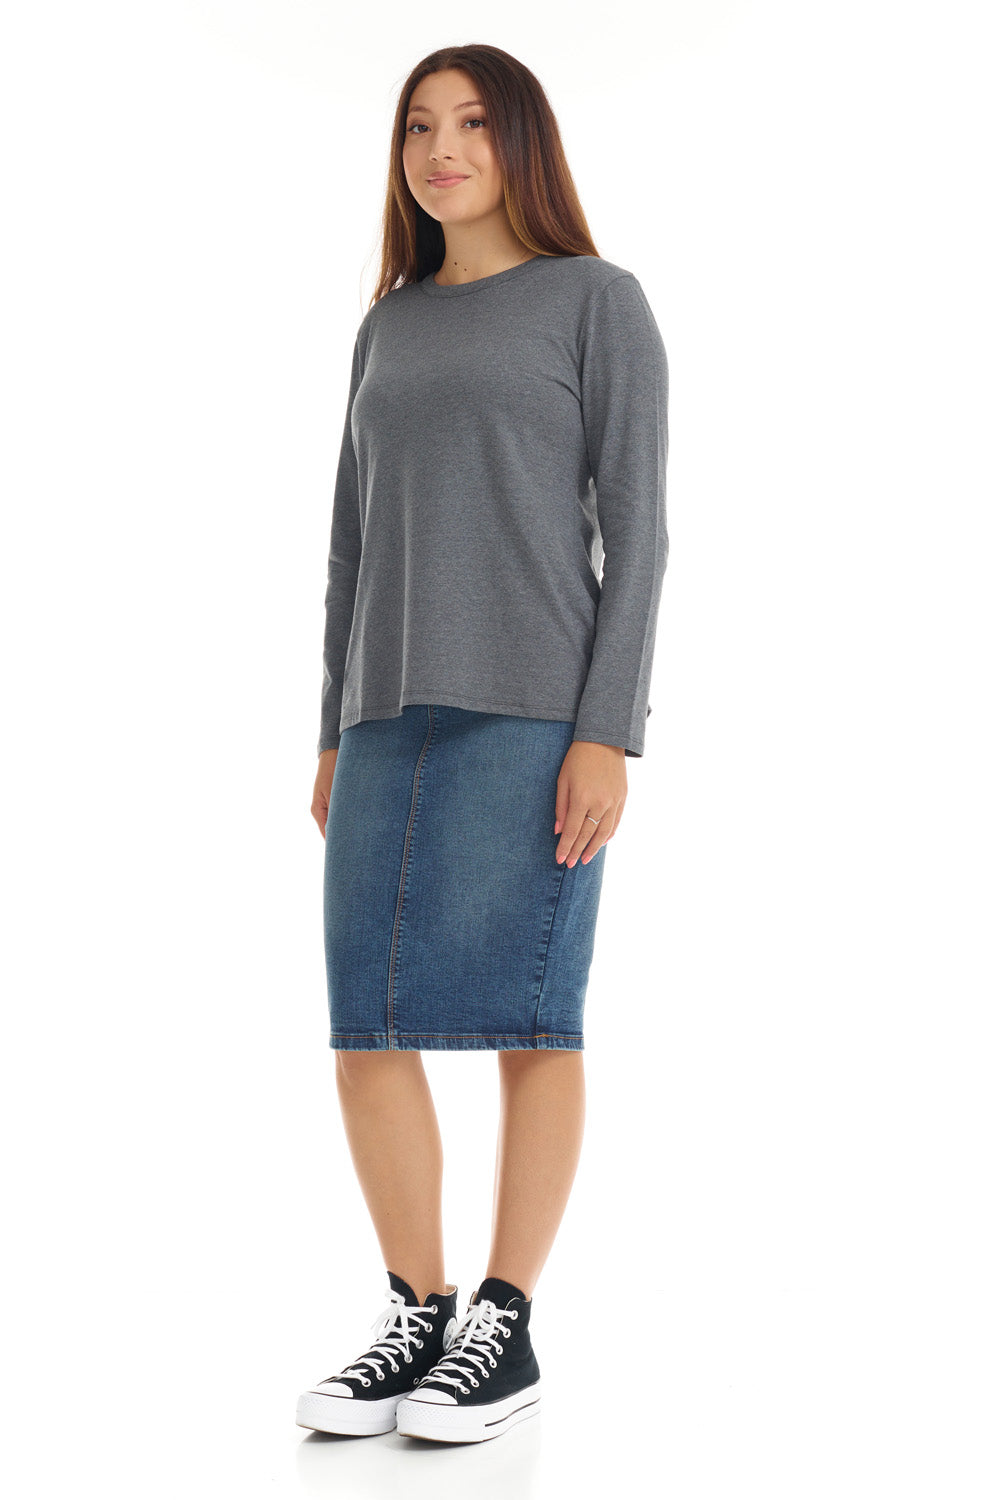 charcoal gray cotton long sleeve tee for women